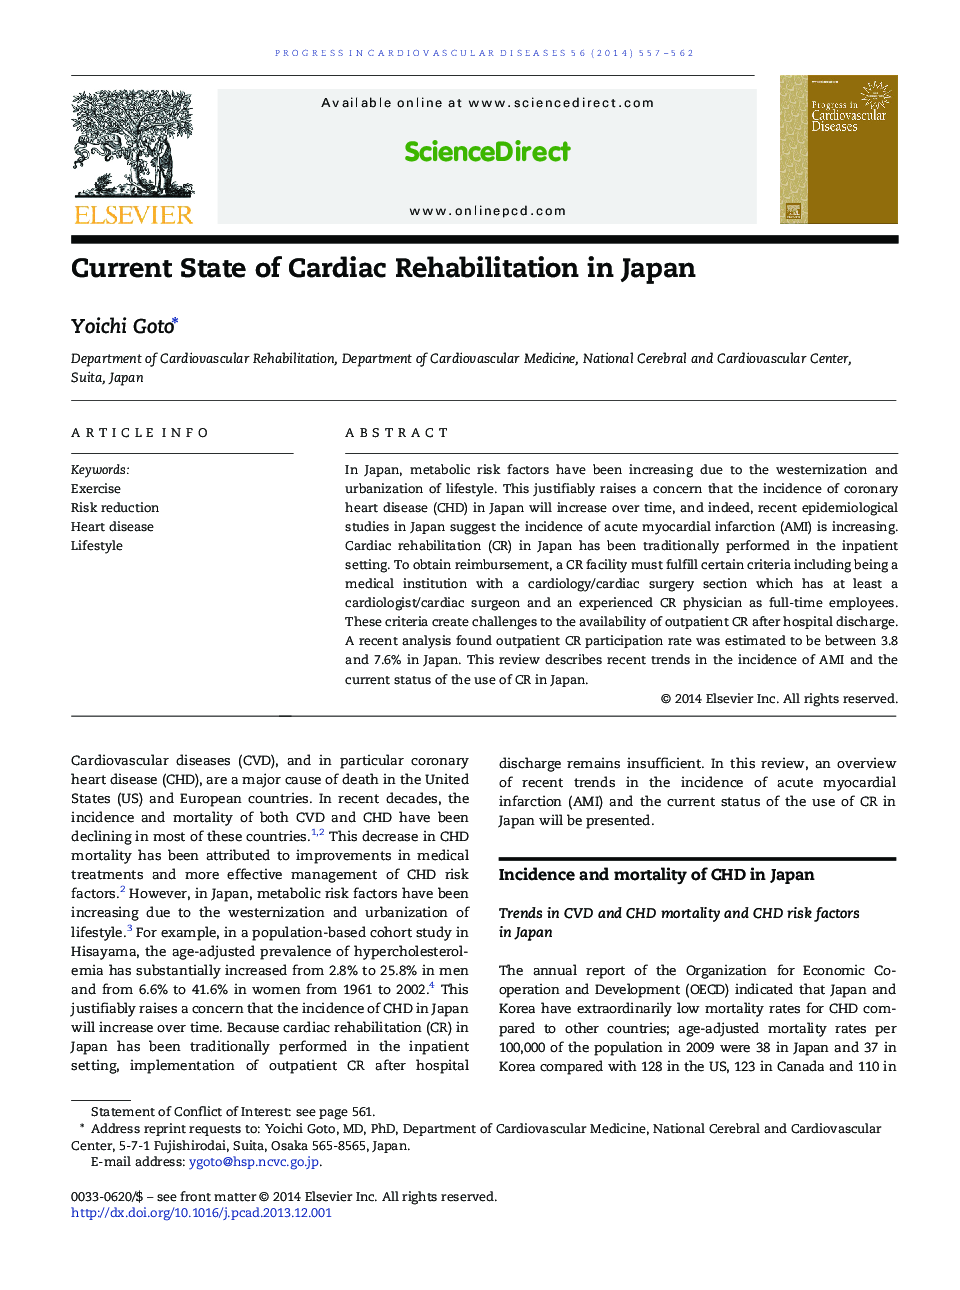 Current State of Cardiac Rehabilitation in Japan